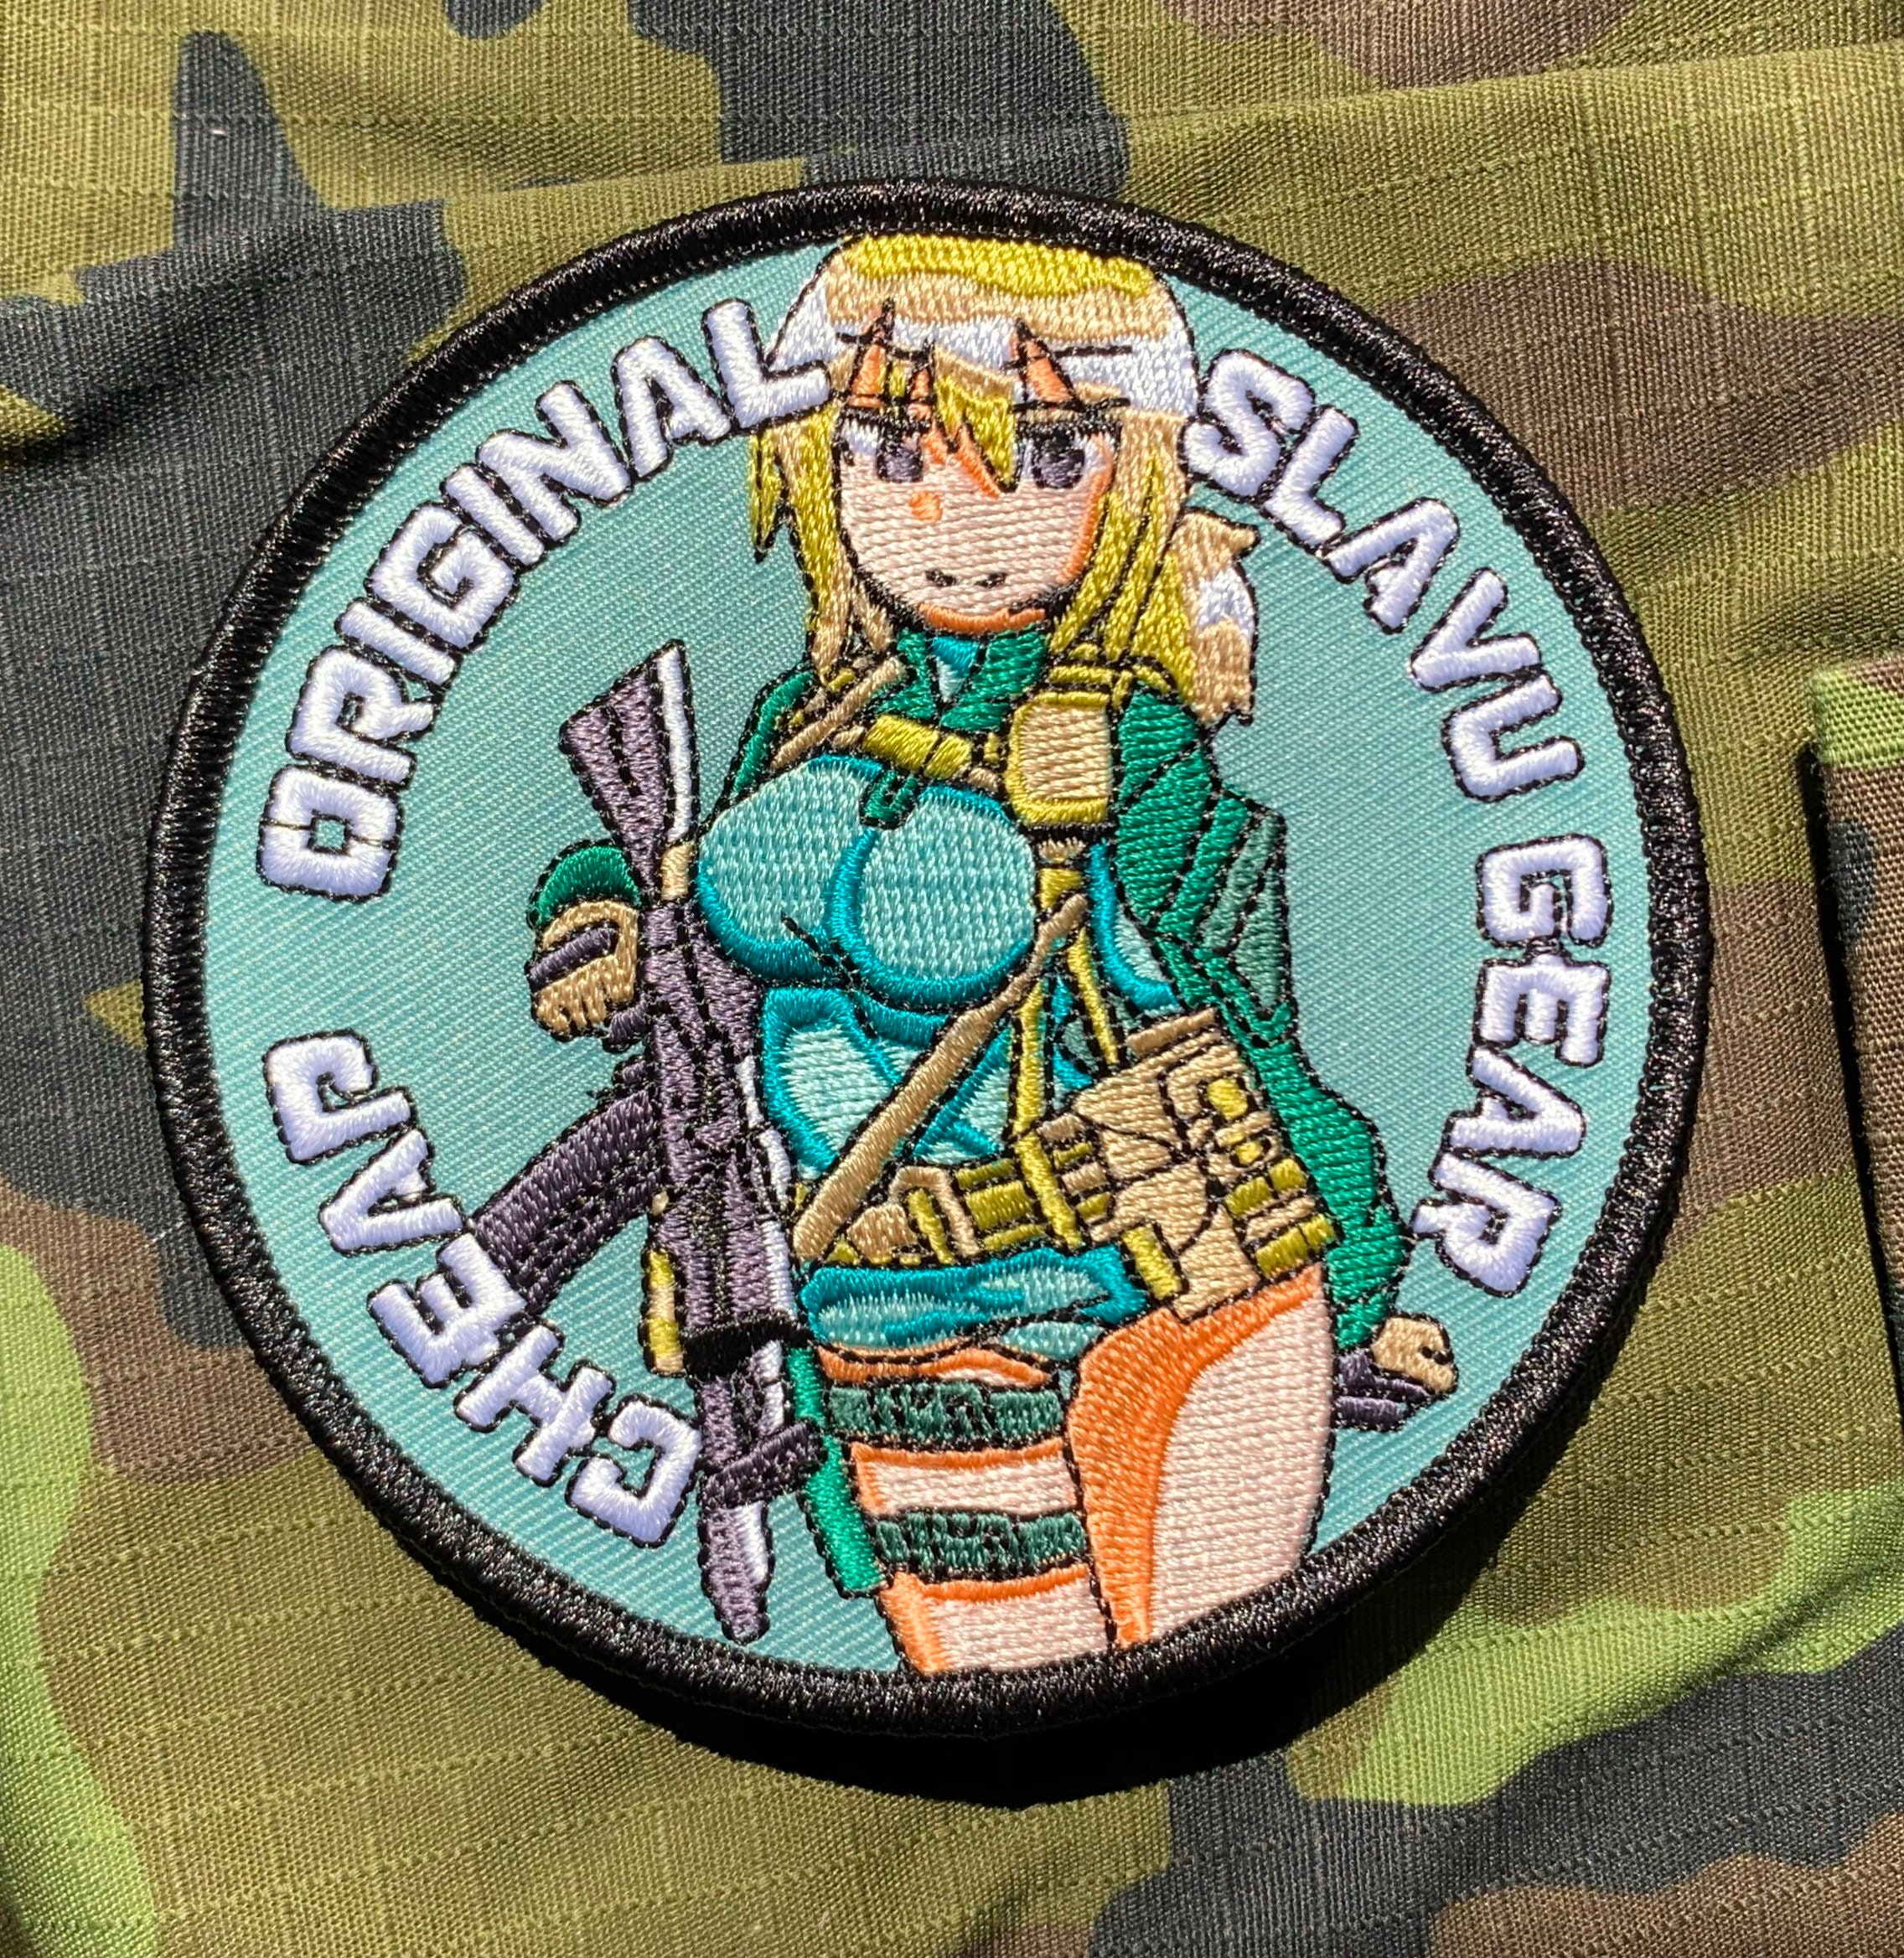 Official Licensed  US Flag w/ Anime Girl Hook Backed Morale Patch